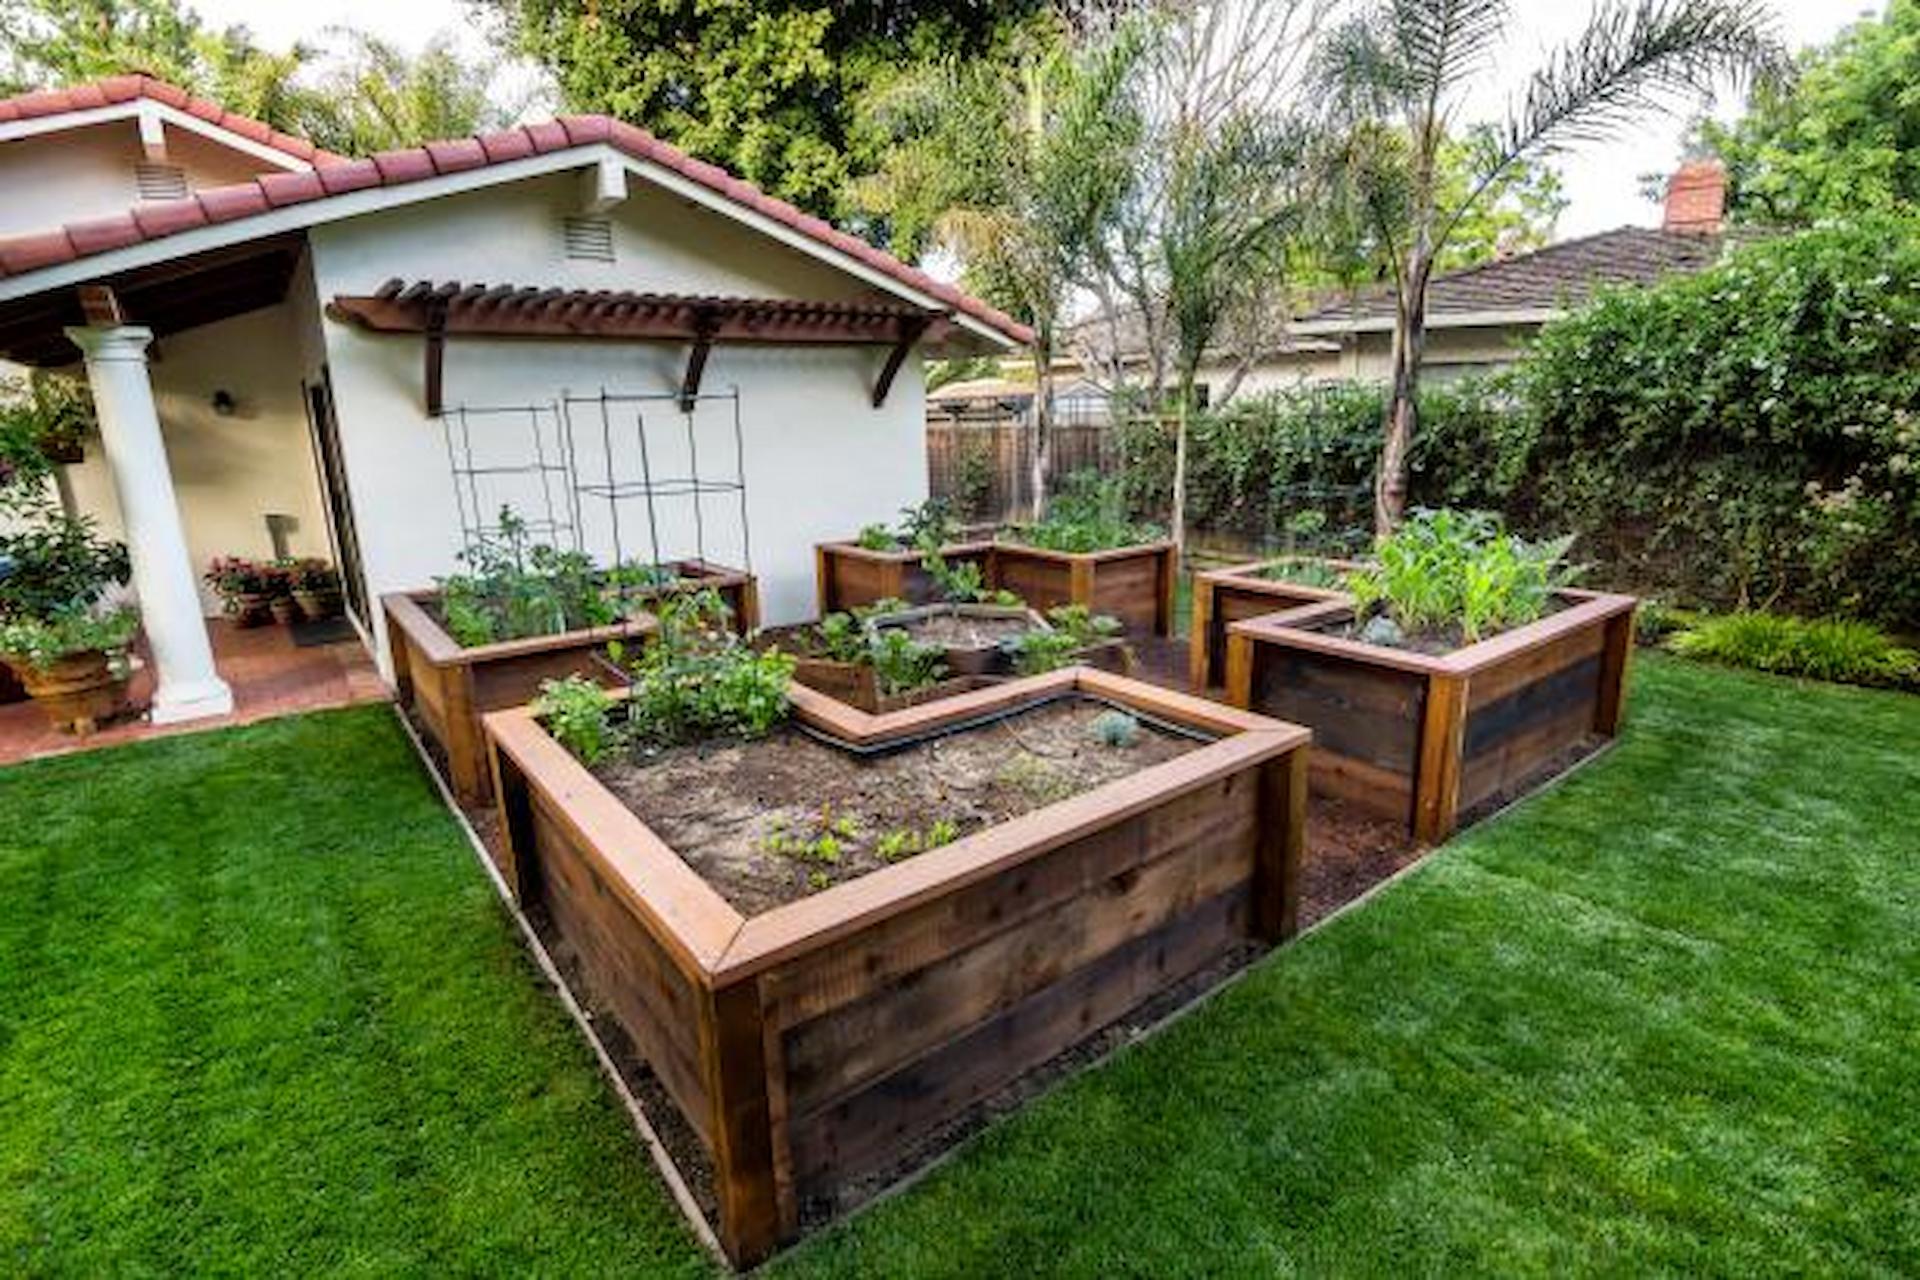 How To Hire The Best Garden Transformation Professionals?